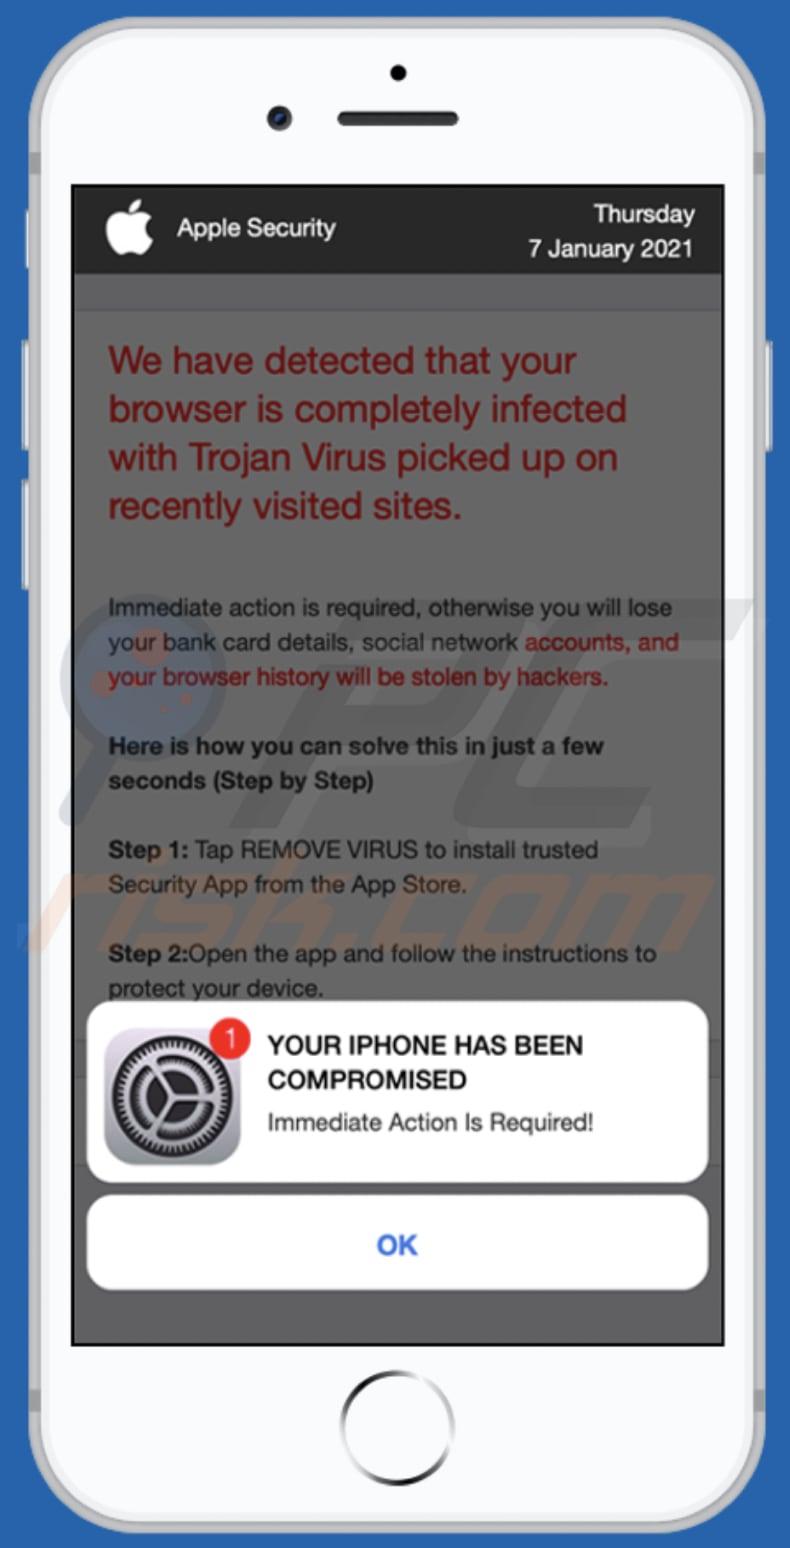 YOUR IPHONE HAS BEEN COMPROMISED - Oplichting